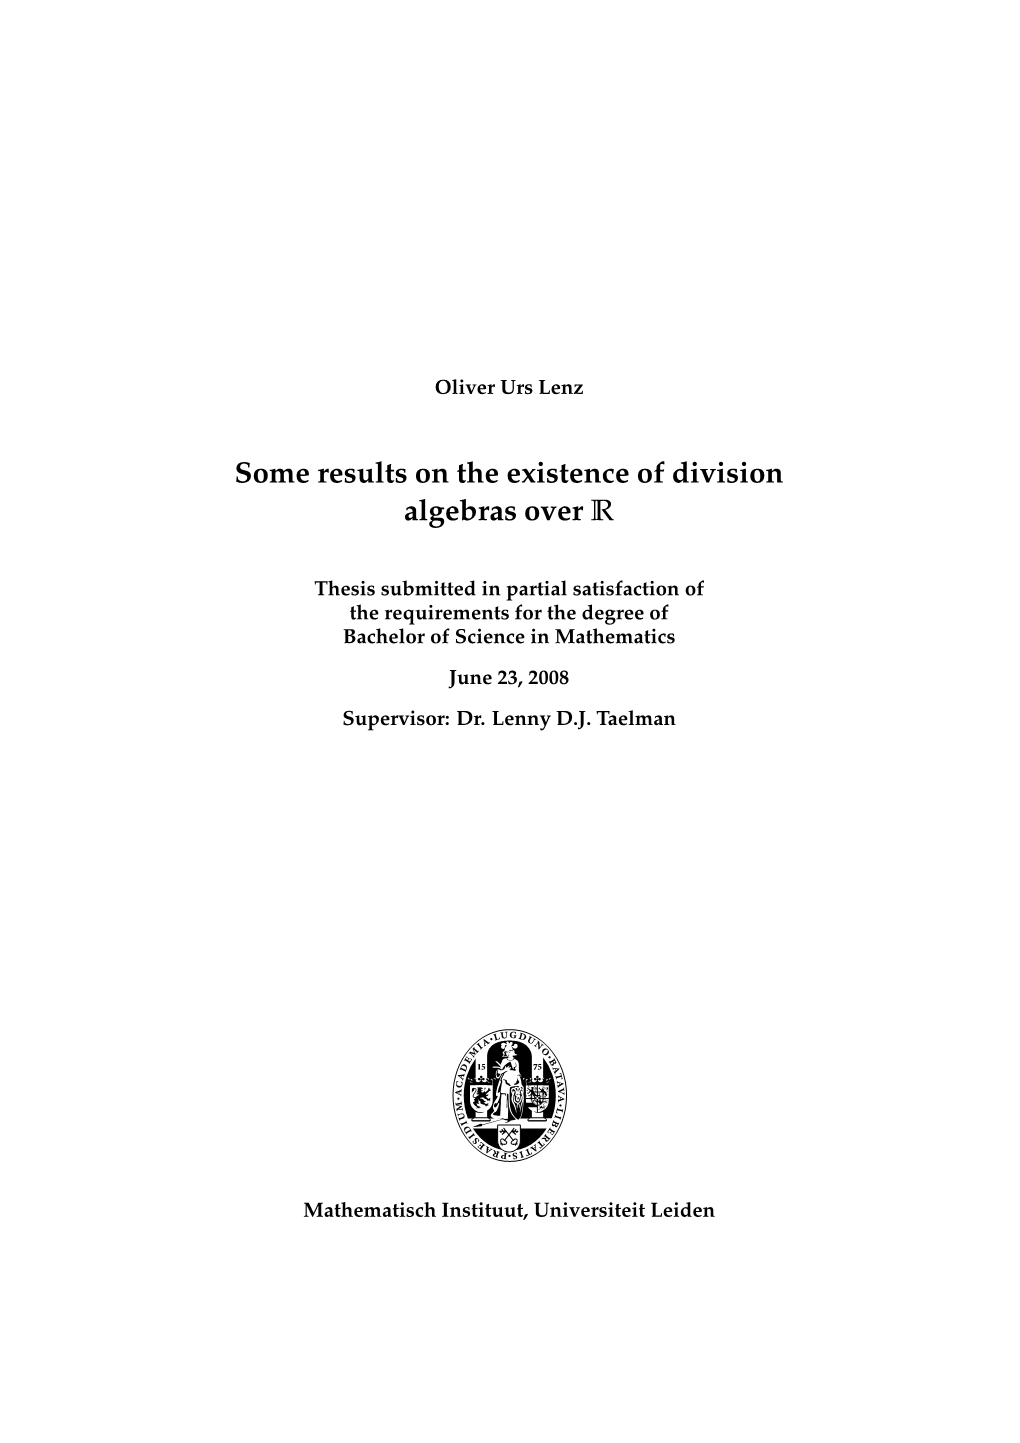 Some Results on the Existence of Division Algebras Over R